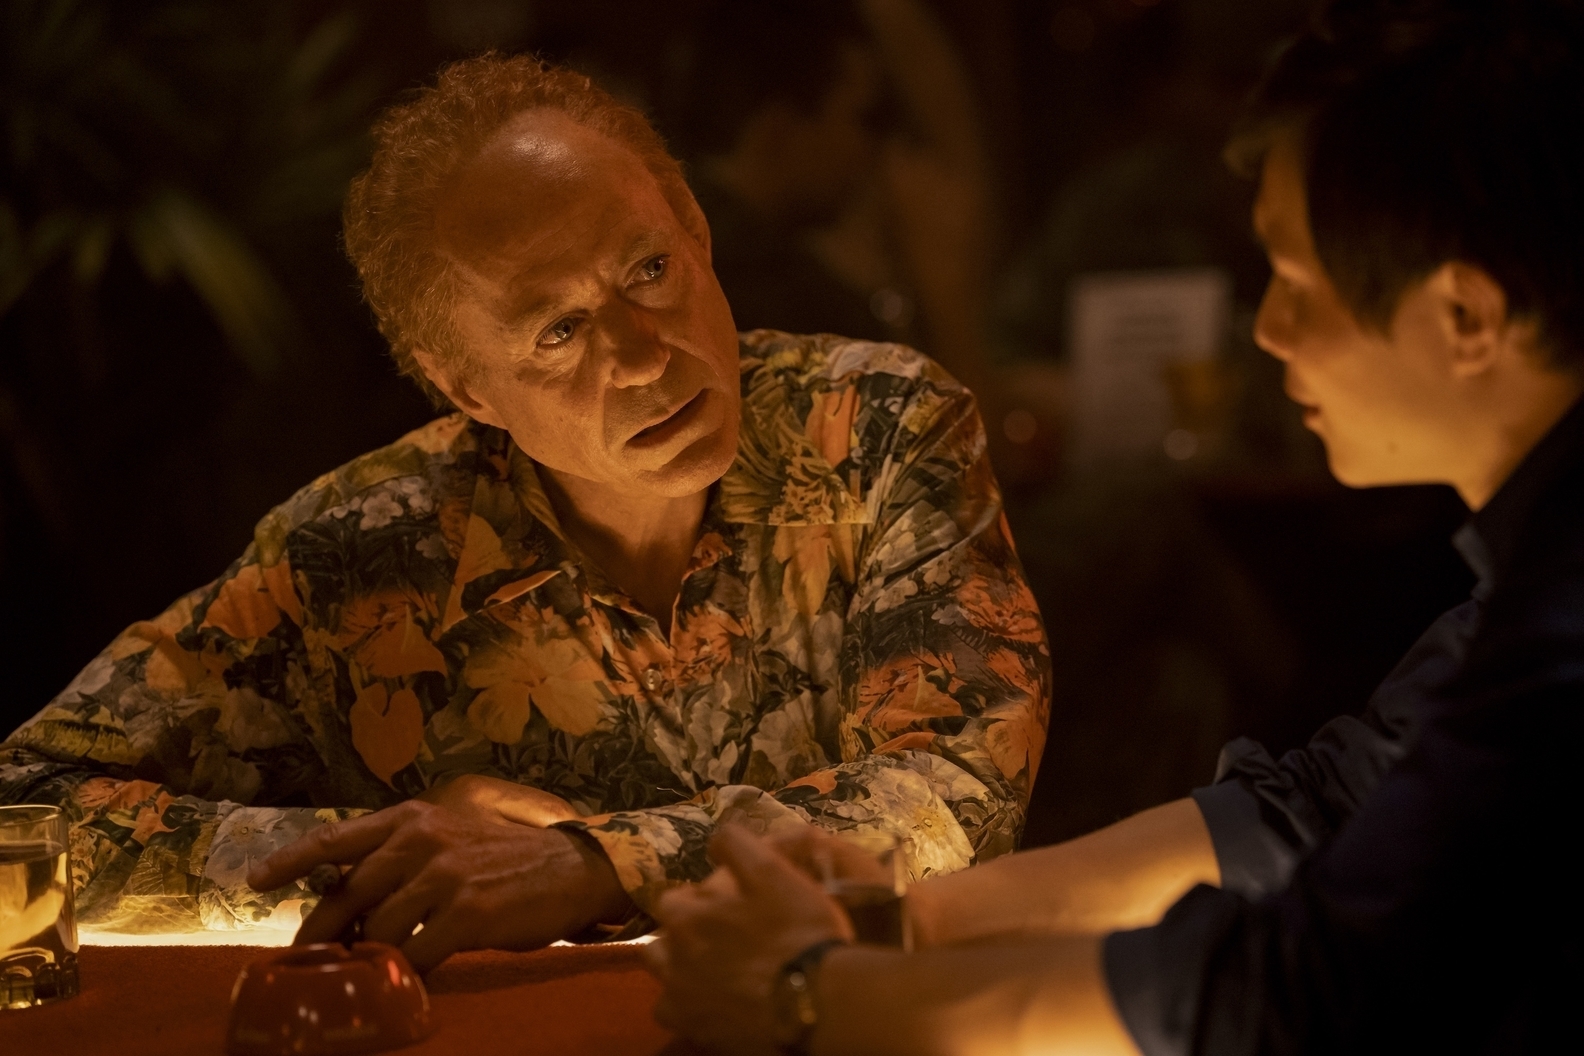 Two characters in a tense scene at a table, one in a floral shirt, from a TV show